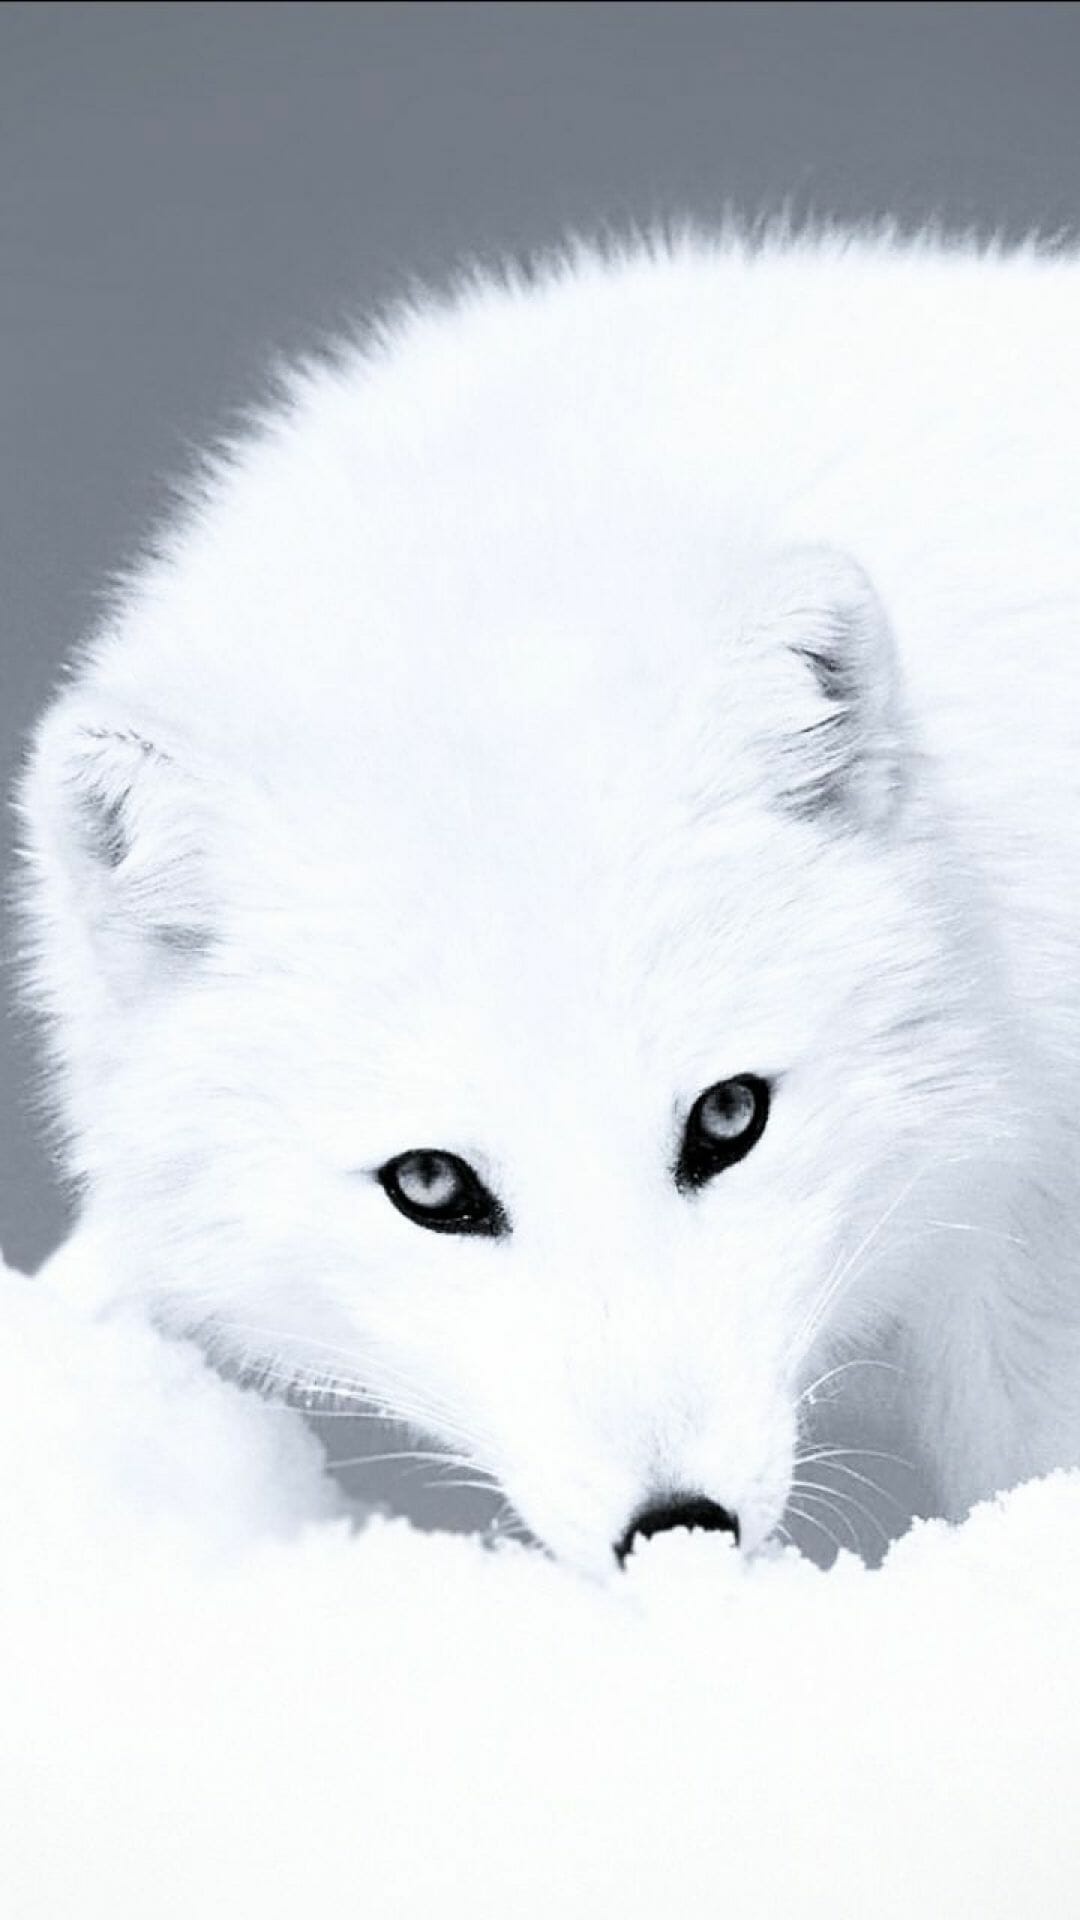 Arctic fox in the wild, Arctic landscape, Fox in the snow, Northern beauty, 1080x1920 Full HD Phone